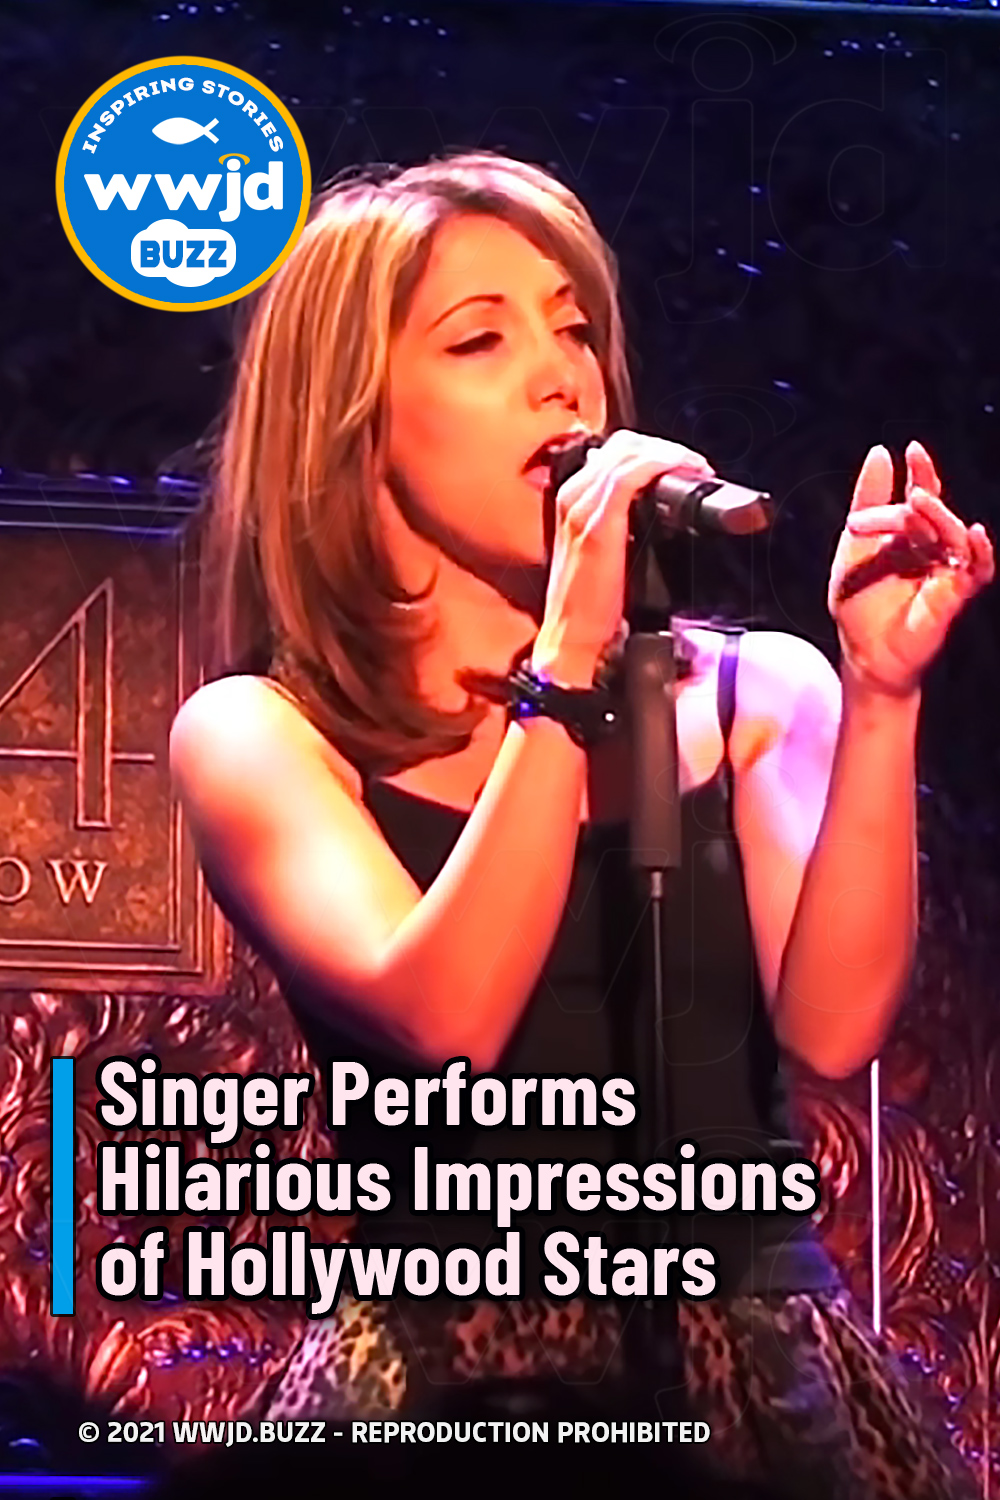 Singer Performs Hilarious Impressions of Hollywood Stars